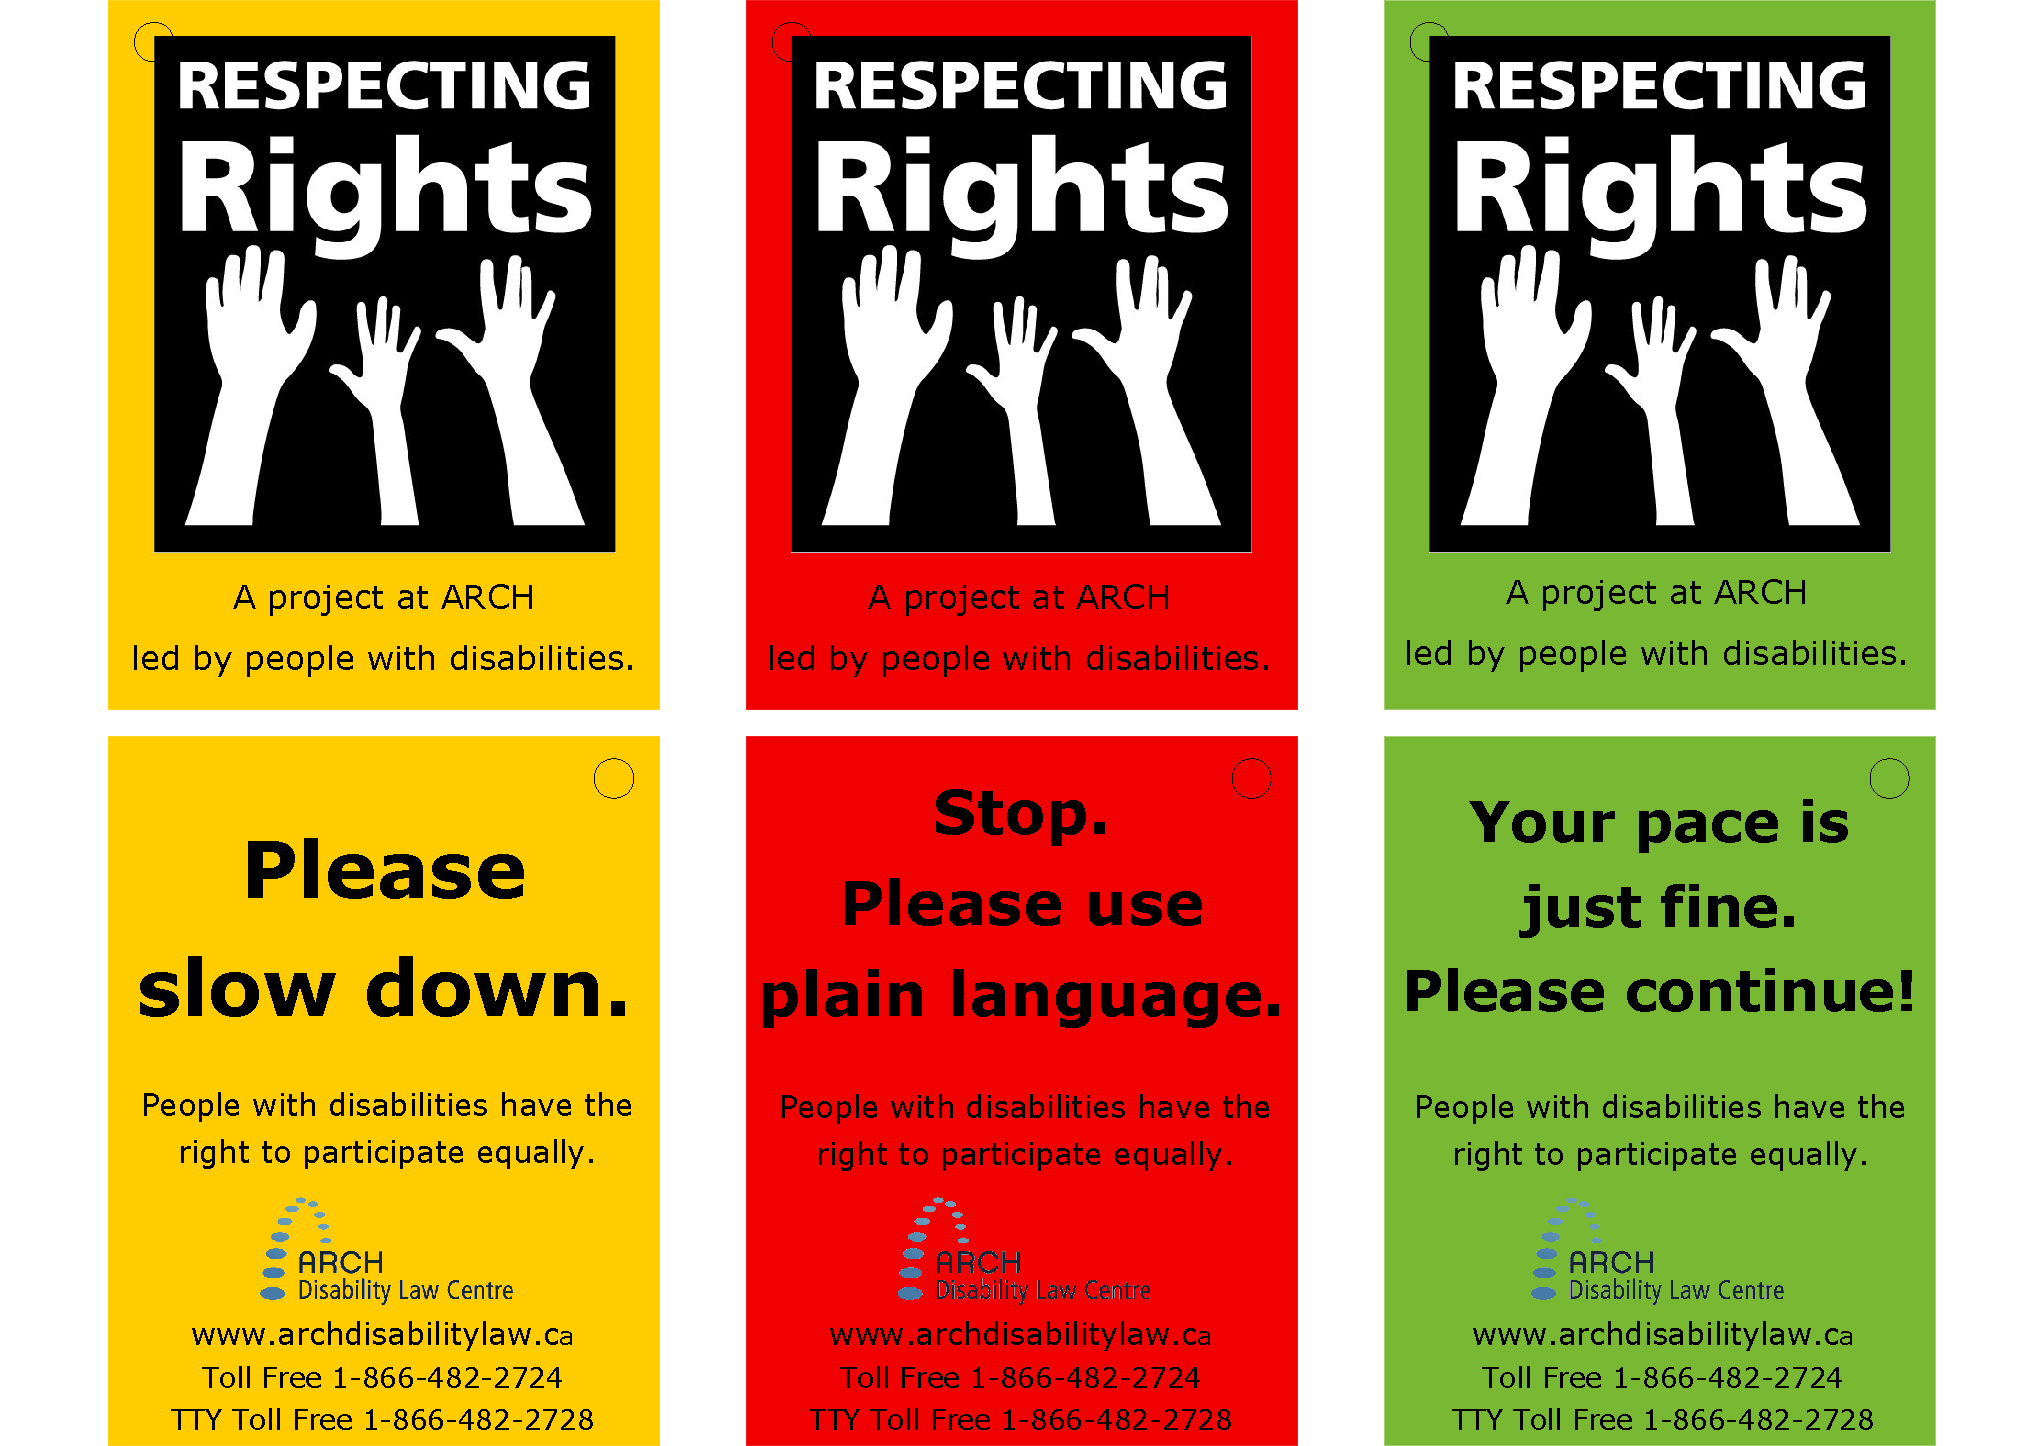 Three “Stop Light” cards. Each card has the Respecting Rights logo: hands reach towards the words “Respecting Rights.” The yellow card says, “Please Slow Down.” The red card says, “Stop. Please use plain language.” The green card says, “Your pace is just fine. Please continue!”